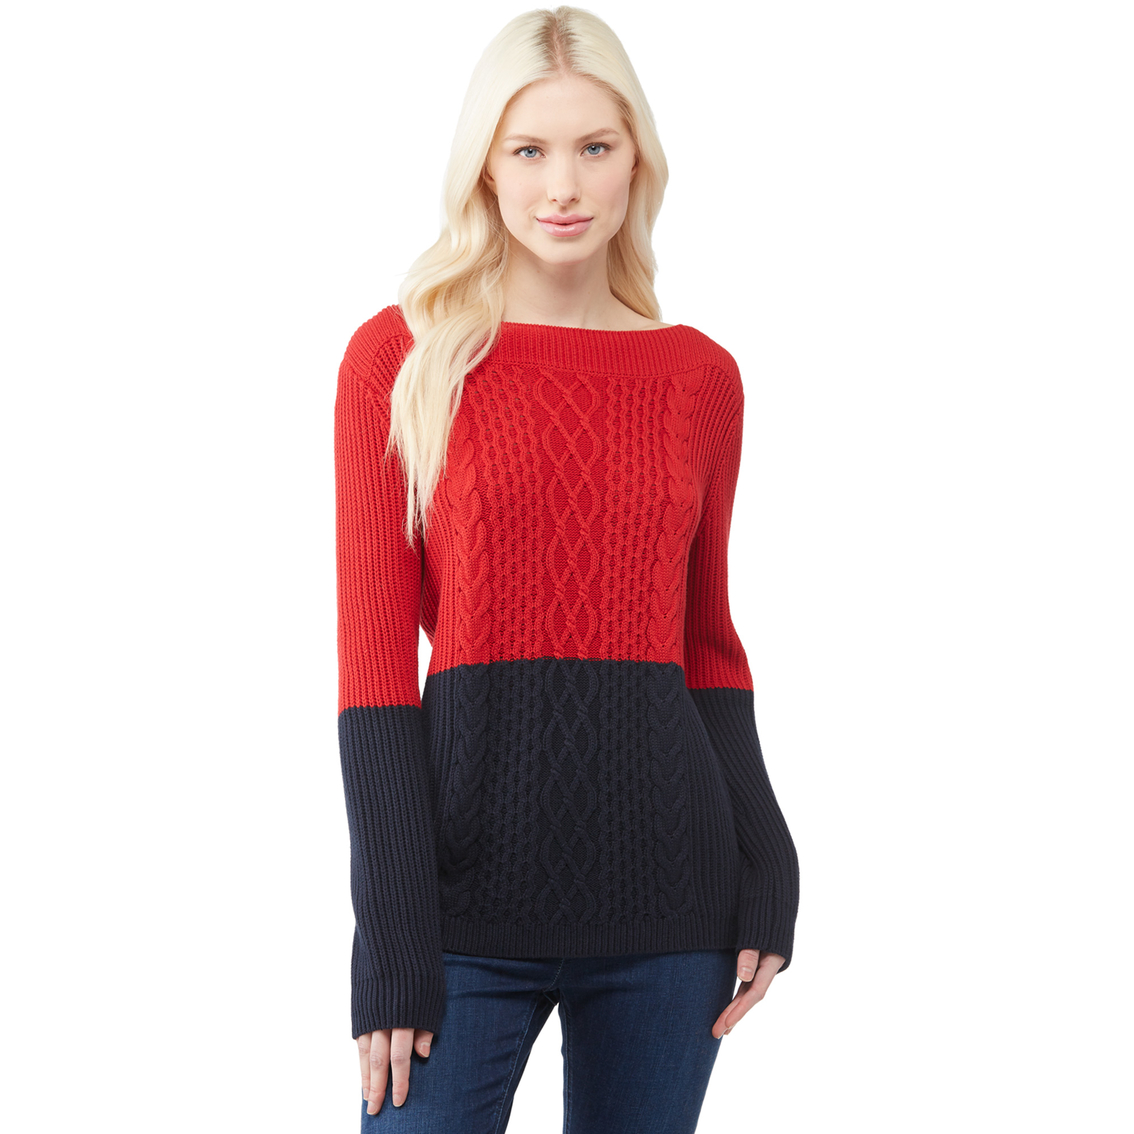 Tommy Hilfiger Misses Cate Colorblock Cable Sweater | Sweaters ...